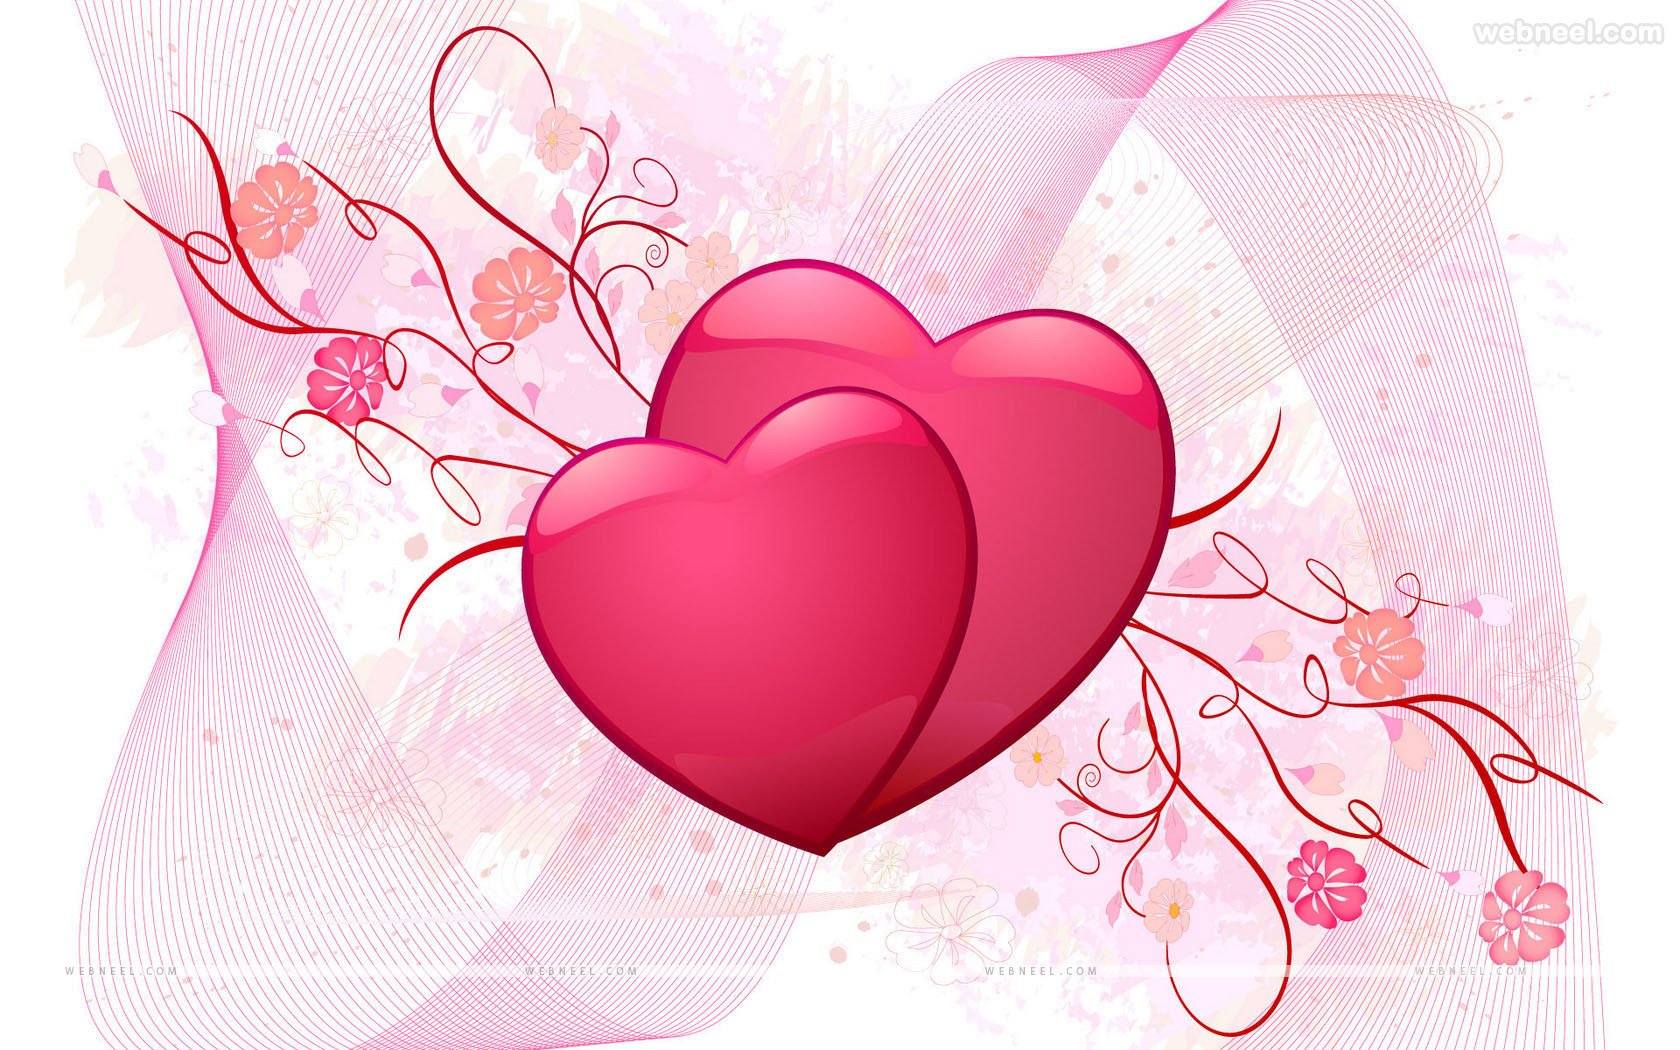 30 Beautiful Valentines Day Wallpapers for your desktop